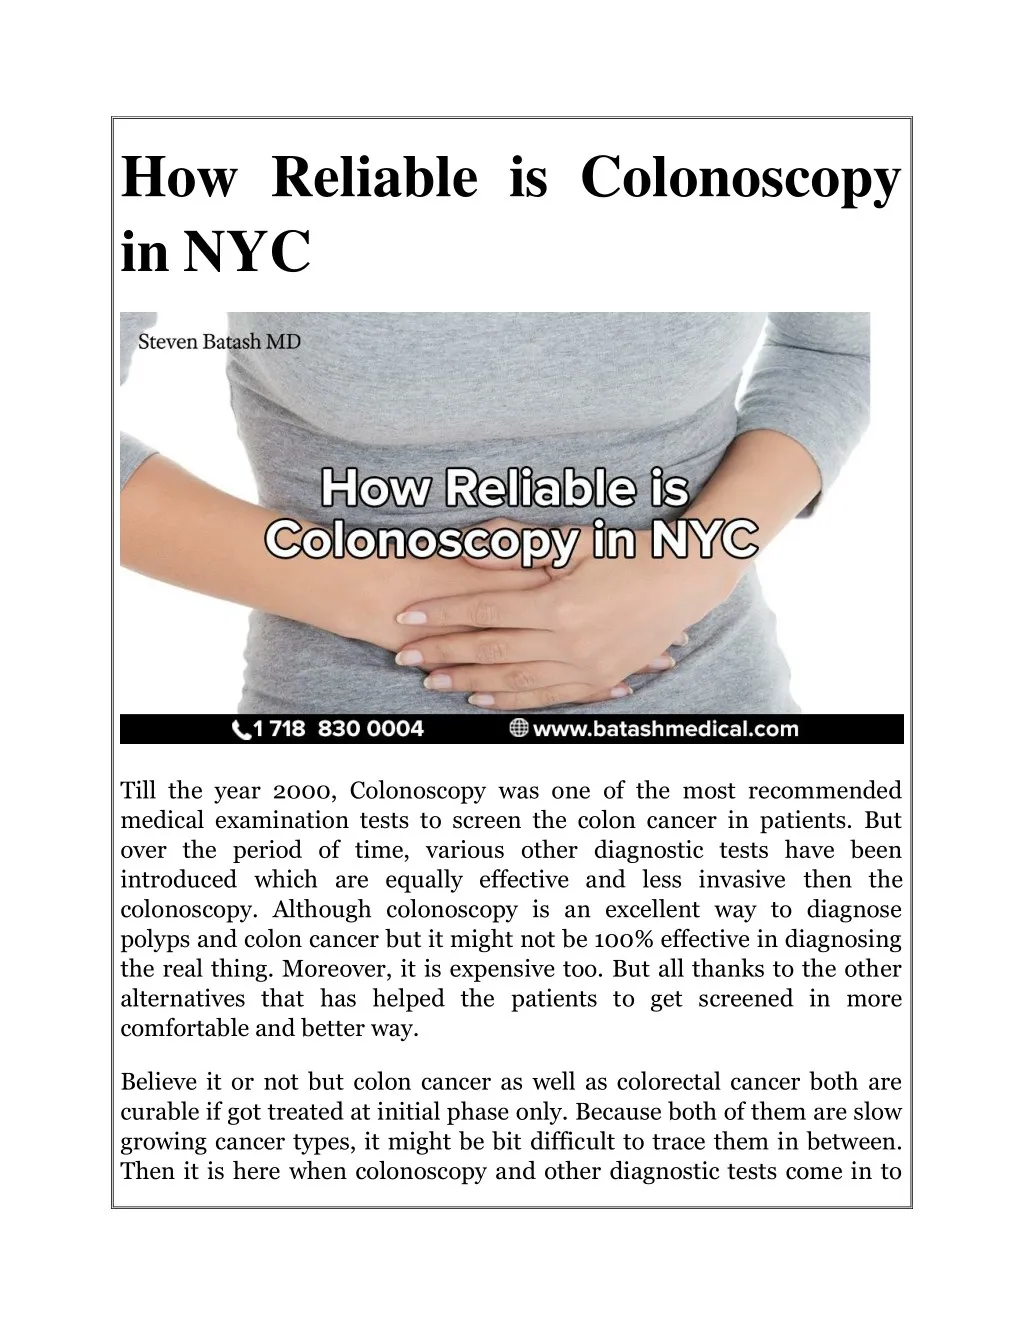 how reliable is colonoscopy in nyc